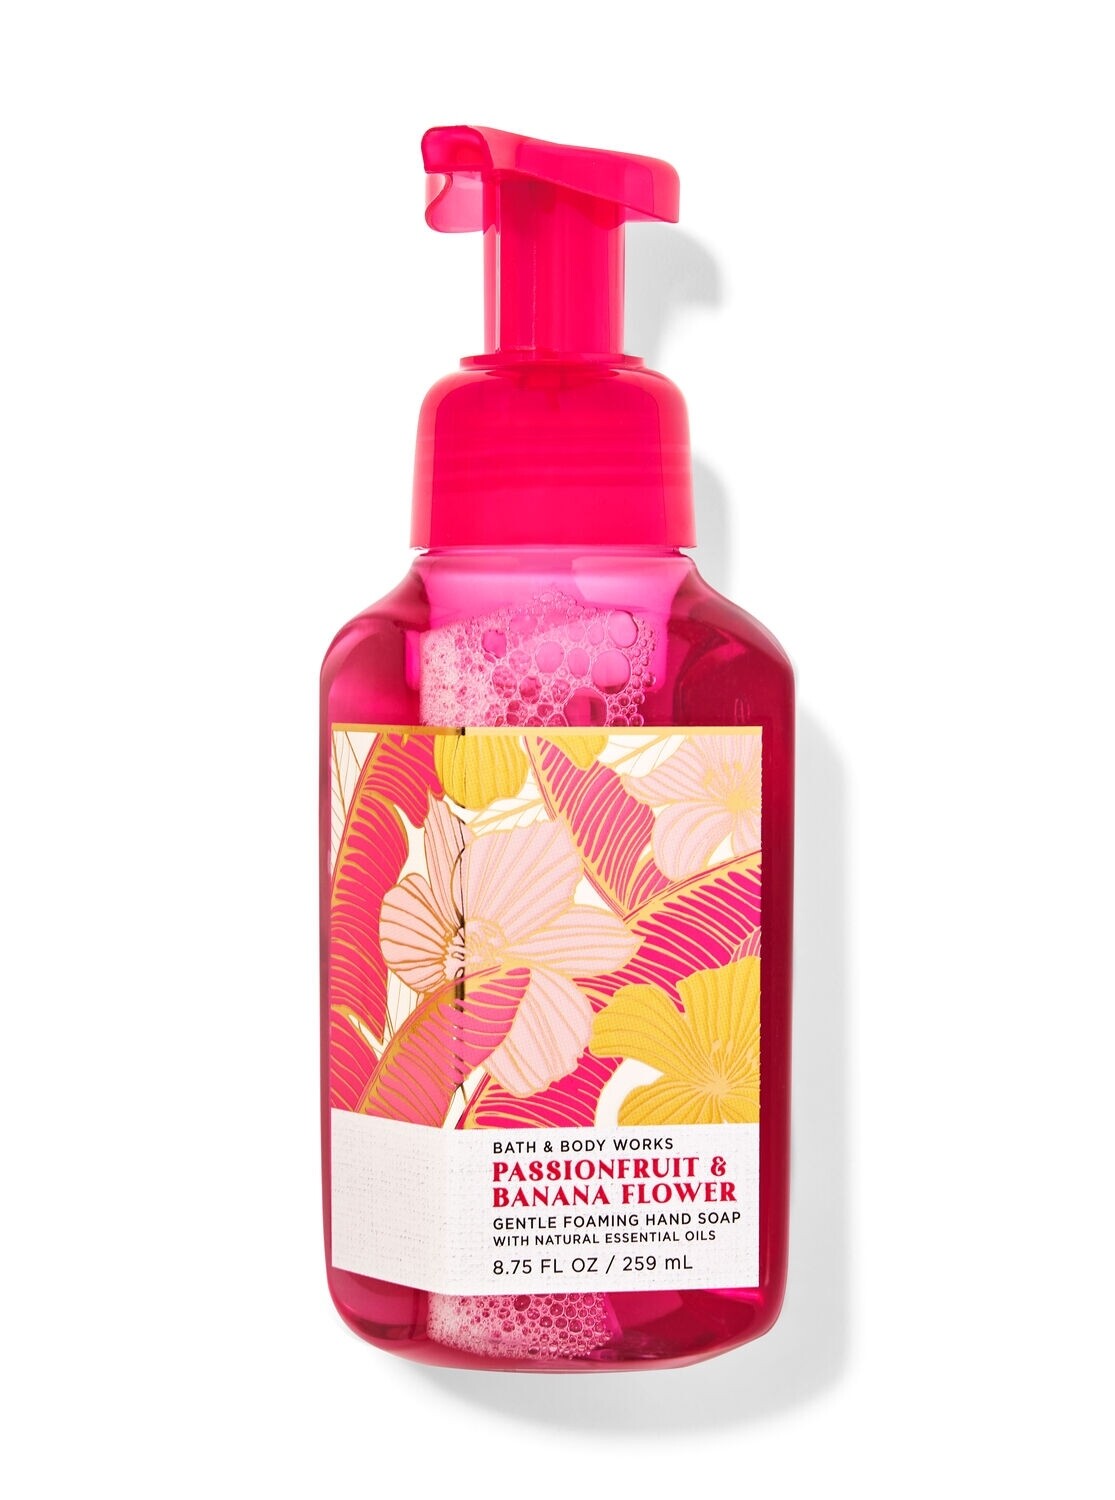 PASSIONFRUIT AND BANANA FLOWER-Foaming Hand Soap